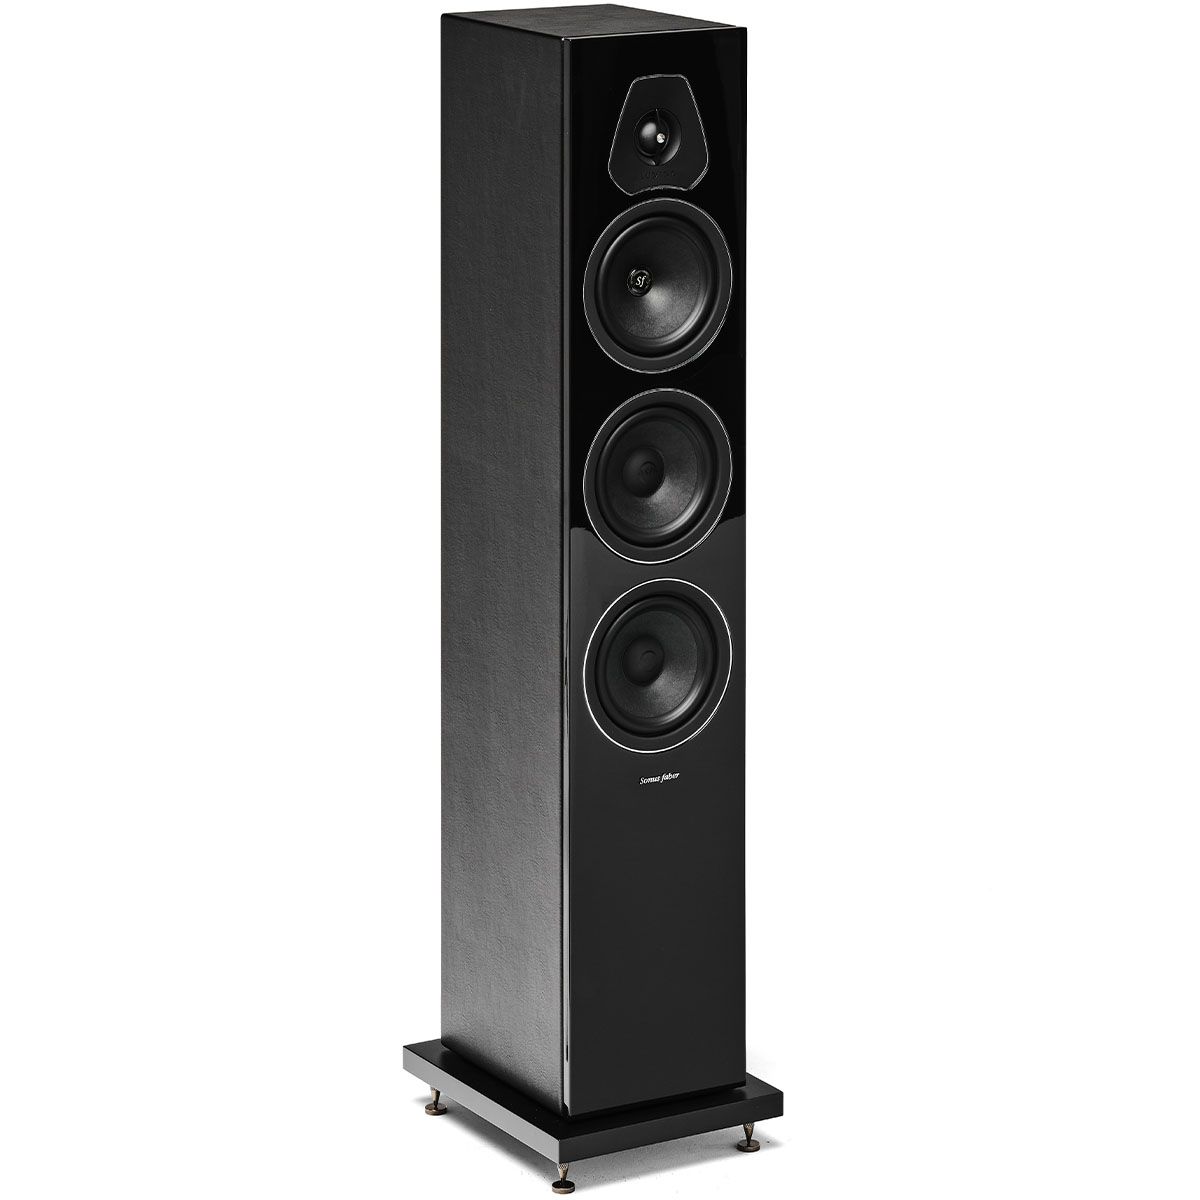 Sonus Faber Lumina III Floorstanding Speaker - Black - Each - angled front view without grille